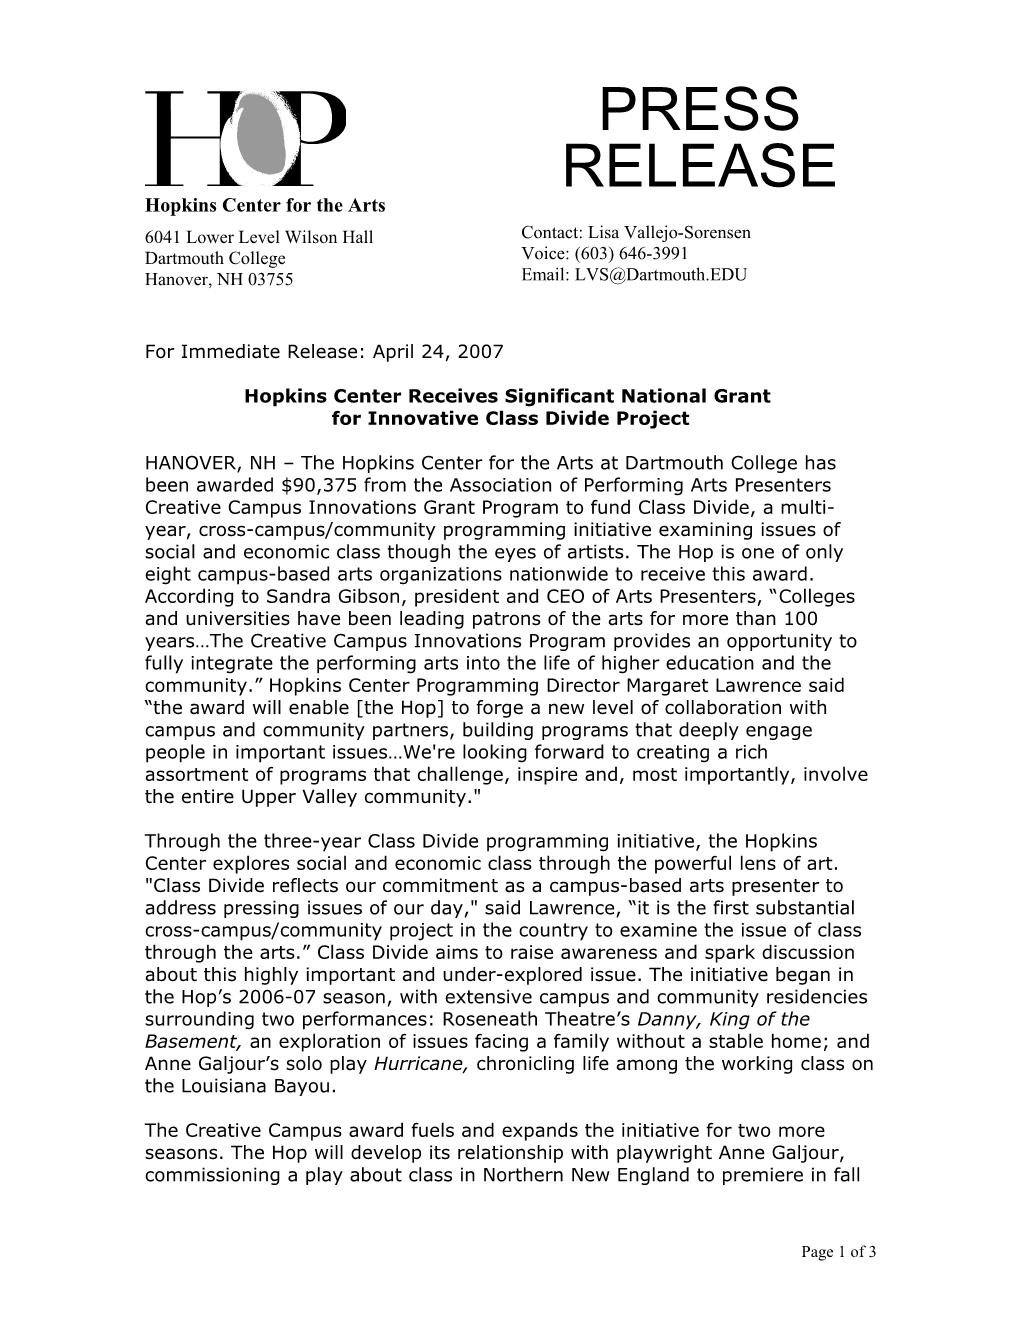 For Immediate Release: March 21, 2007